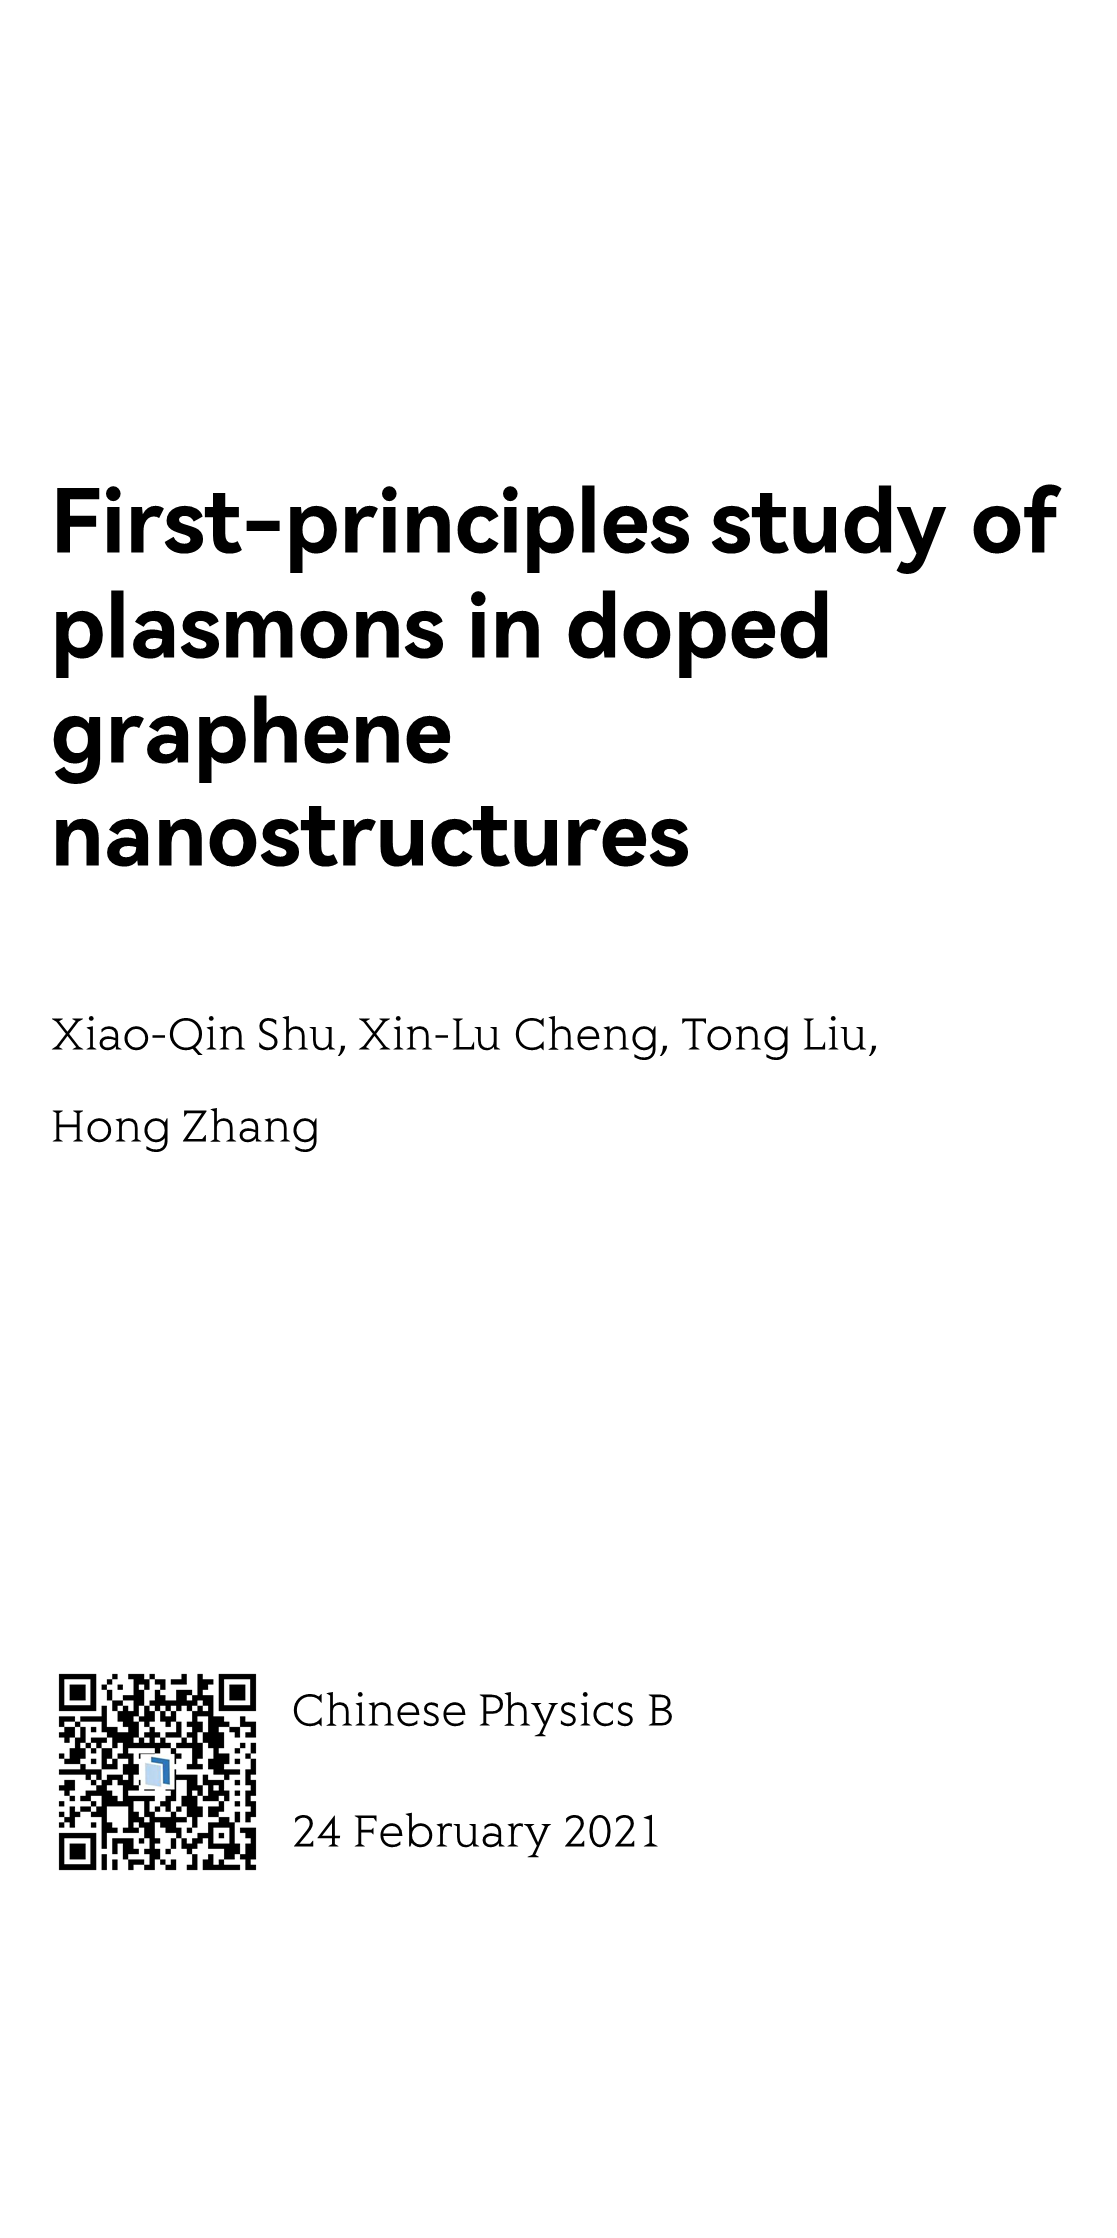 First-principles study of plasmons in doped graphene nanostructures_1